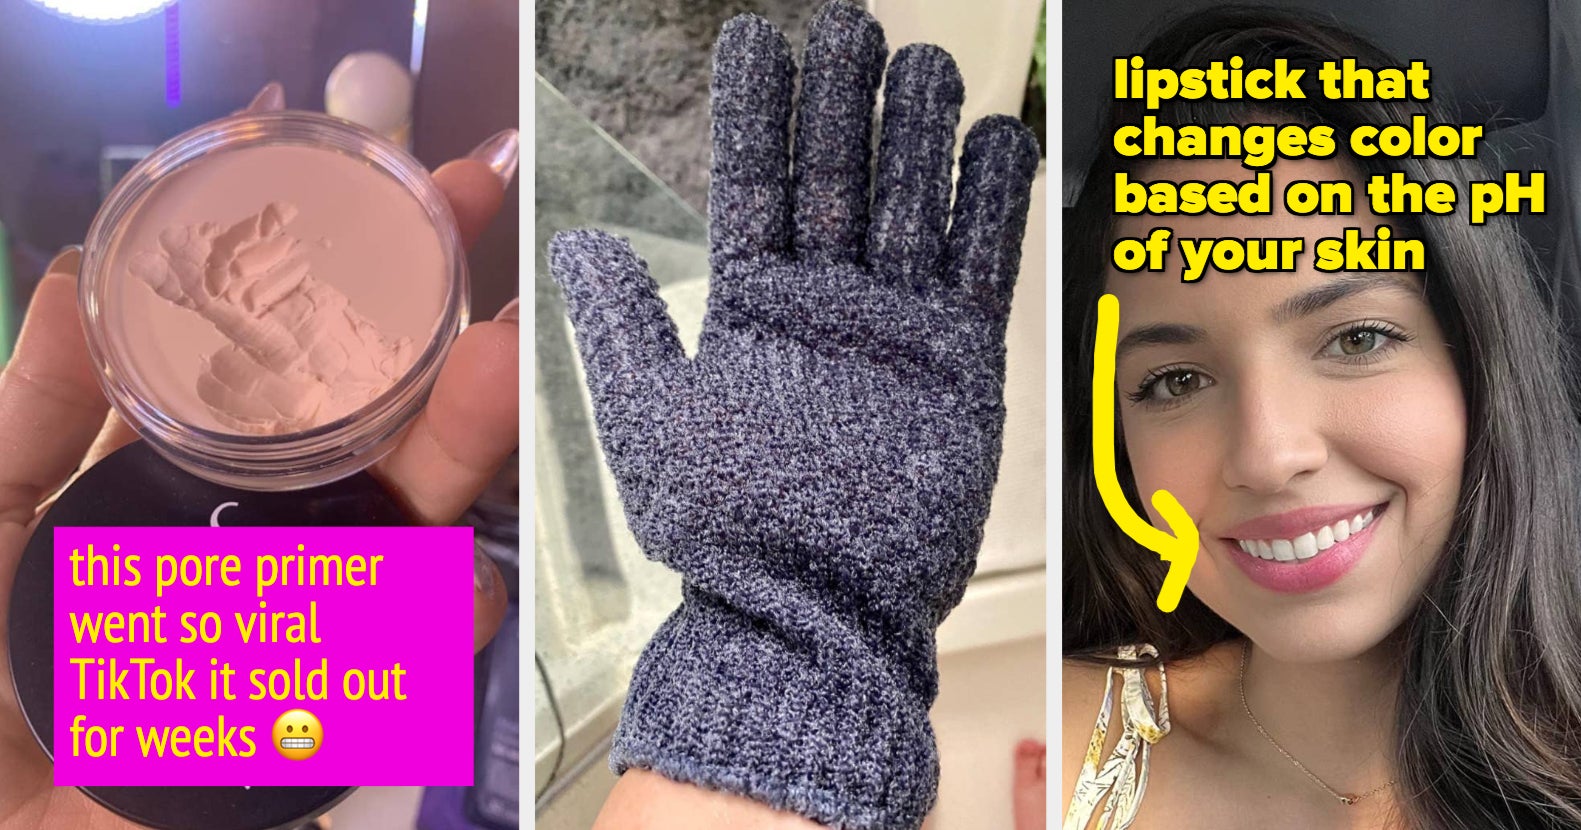 10 TikTok viral beauty products that will revolutionise your